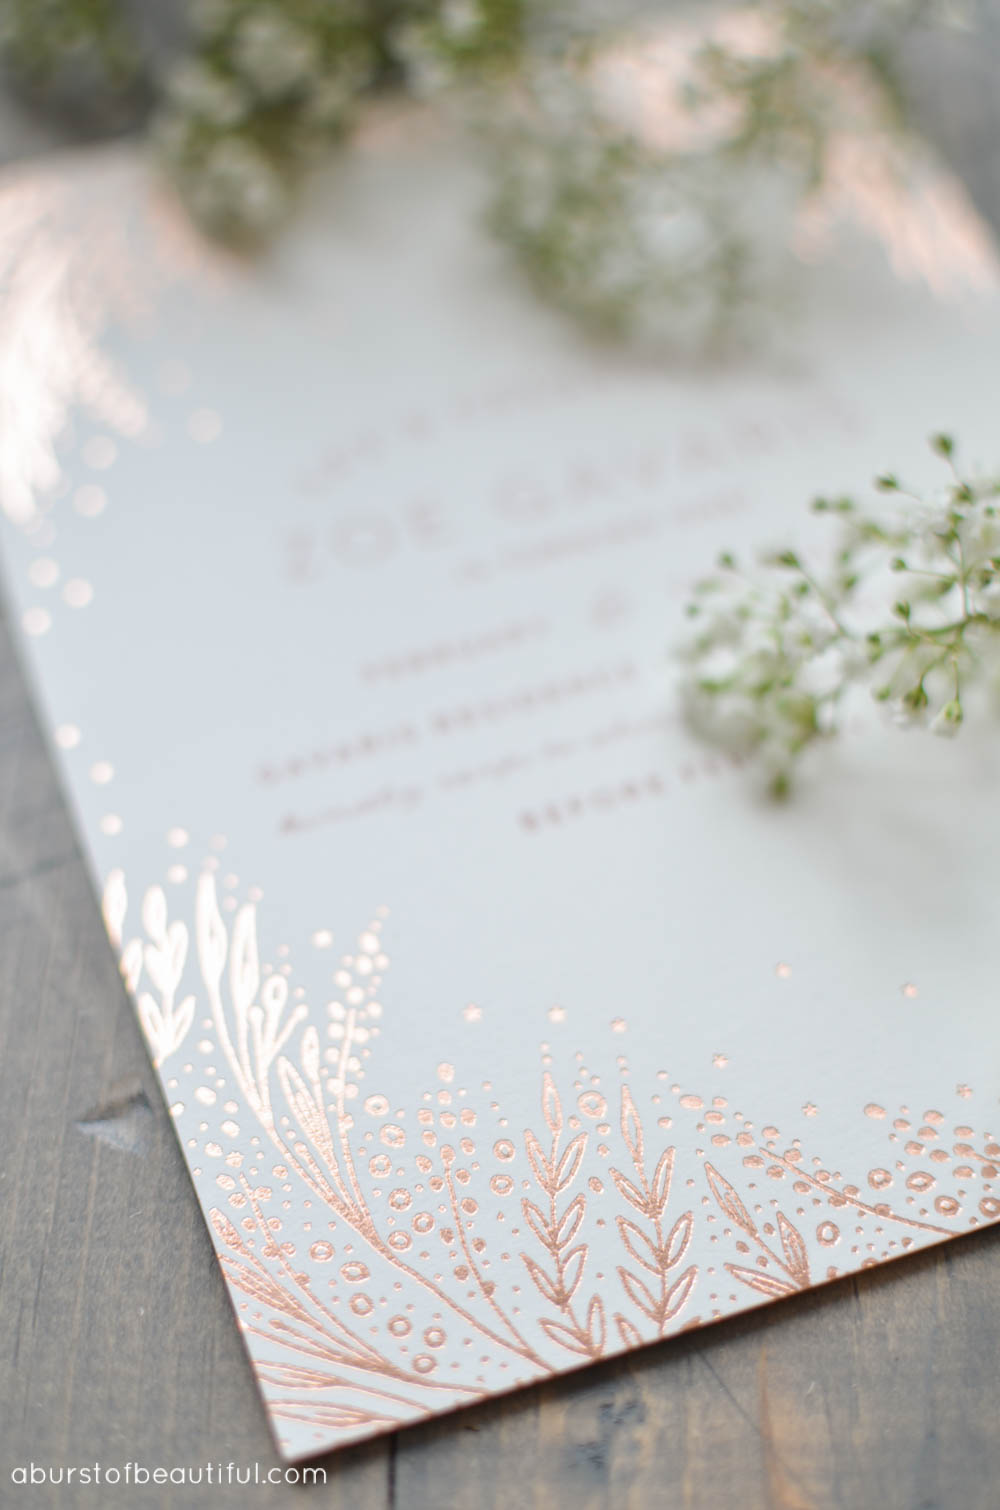 These beautiful hand-pressed foil invitations add a special touch to a vintage-inspired first birthday party | A Burst of Beautiful